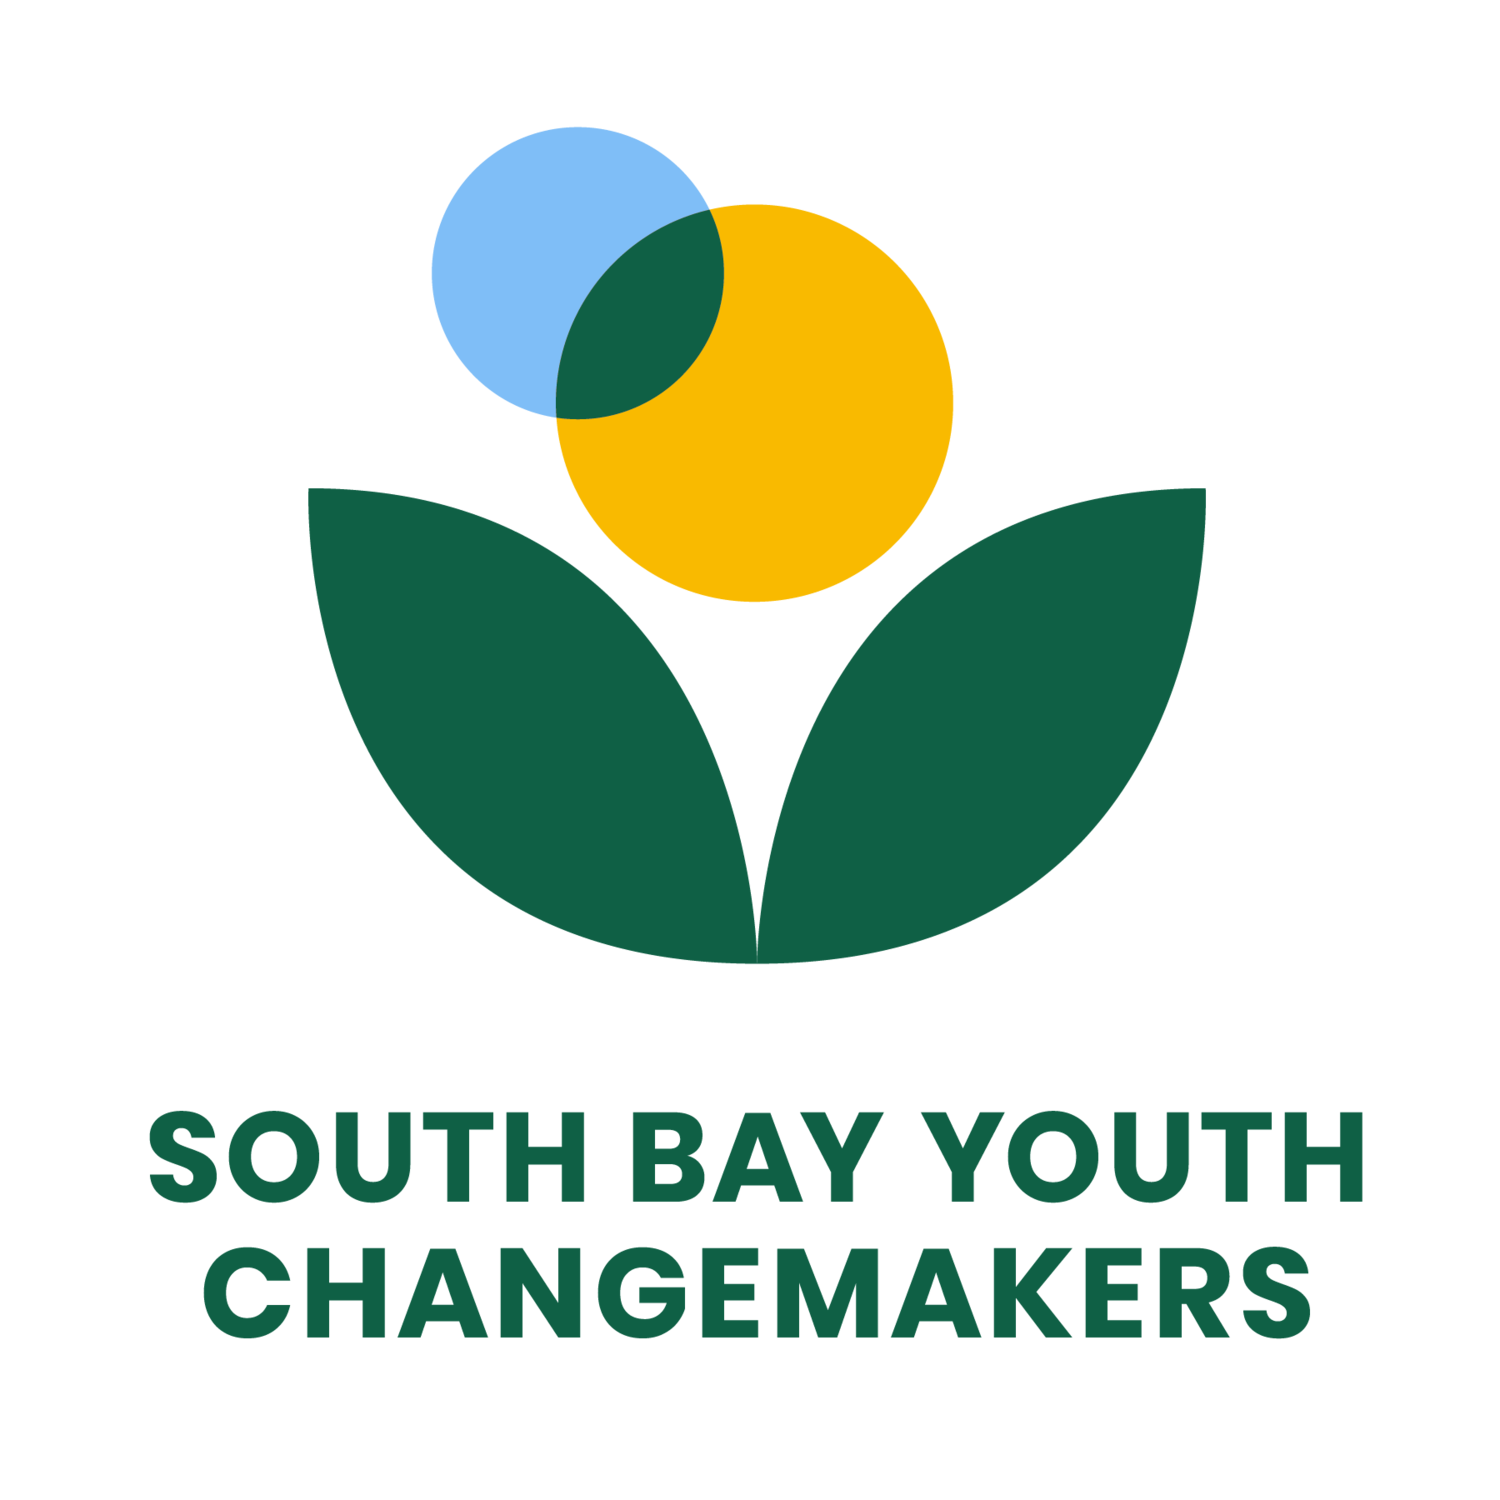 South Bay Youth Changemakers